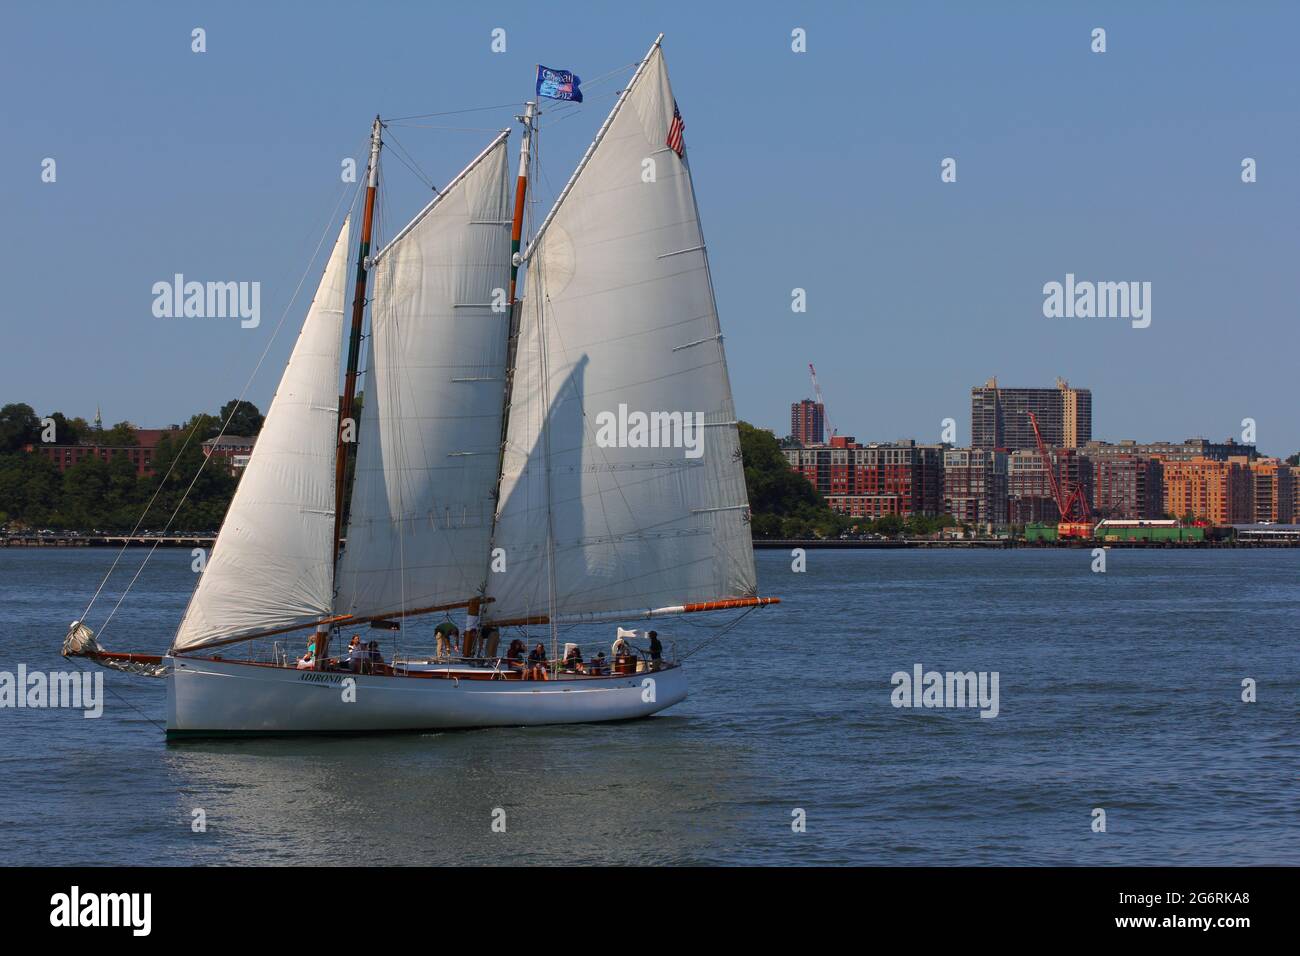 Boat onthe sea during navigation Stock Photo